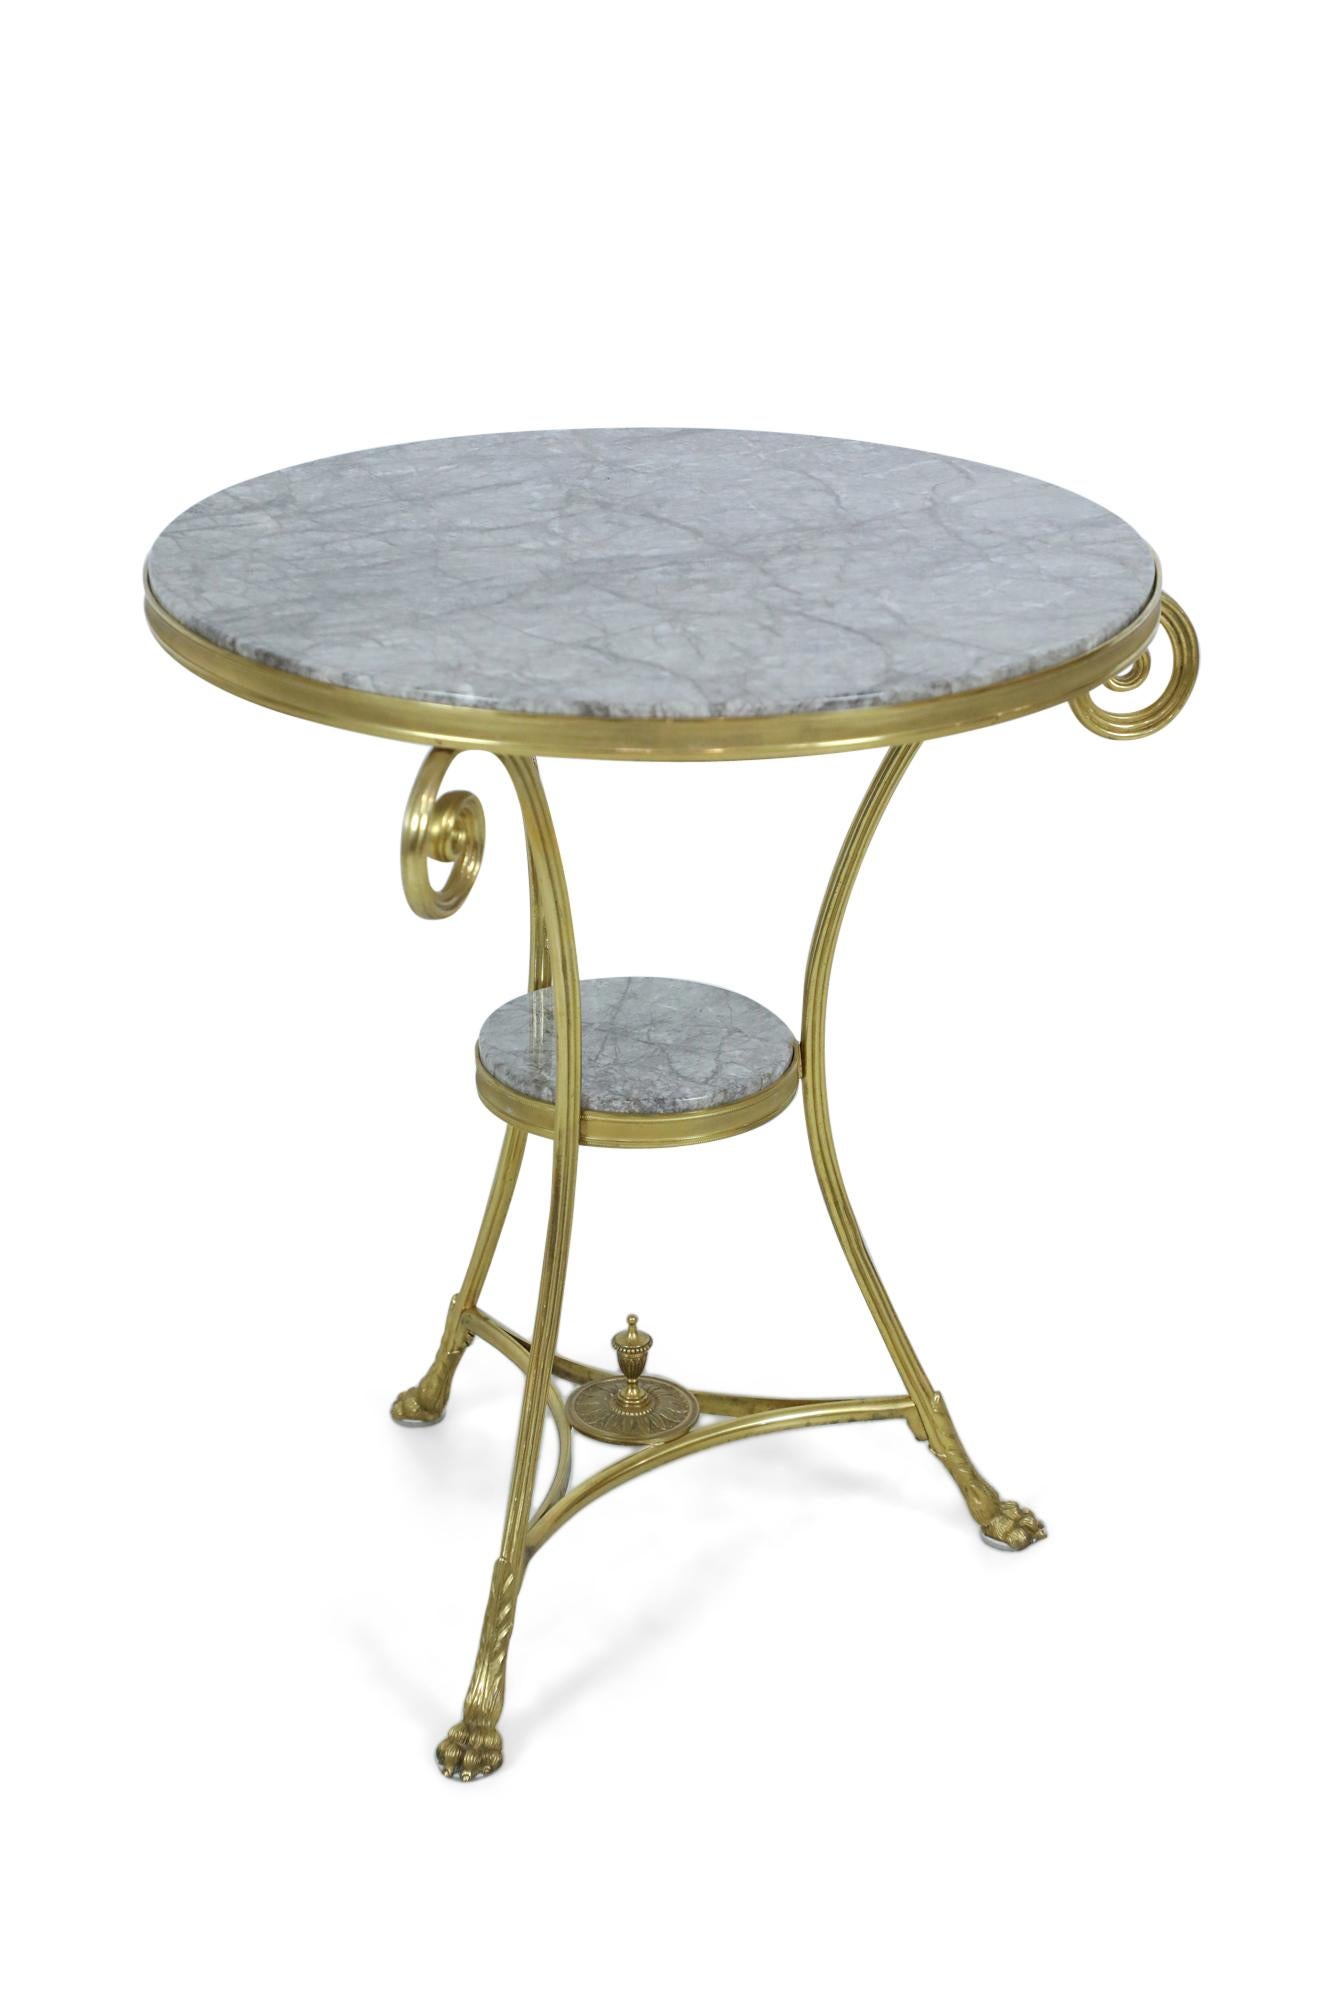 20th Century French Charles X-style Bronze Gueridon with Marble Top and Shelf